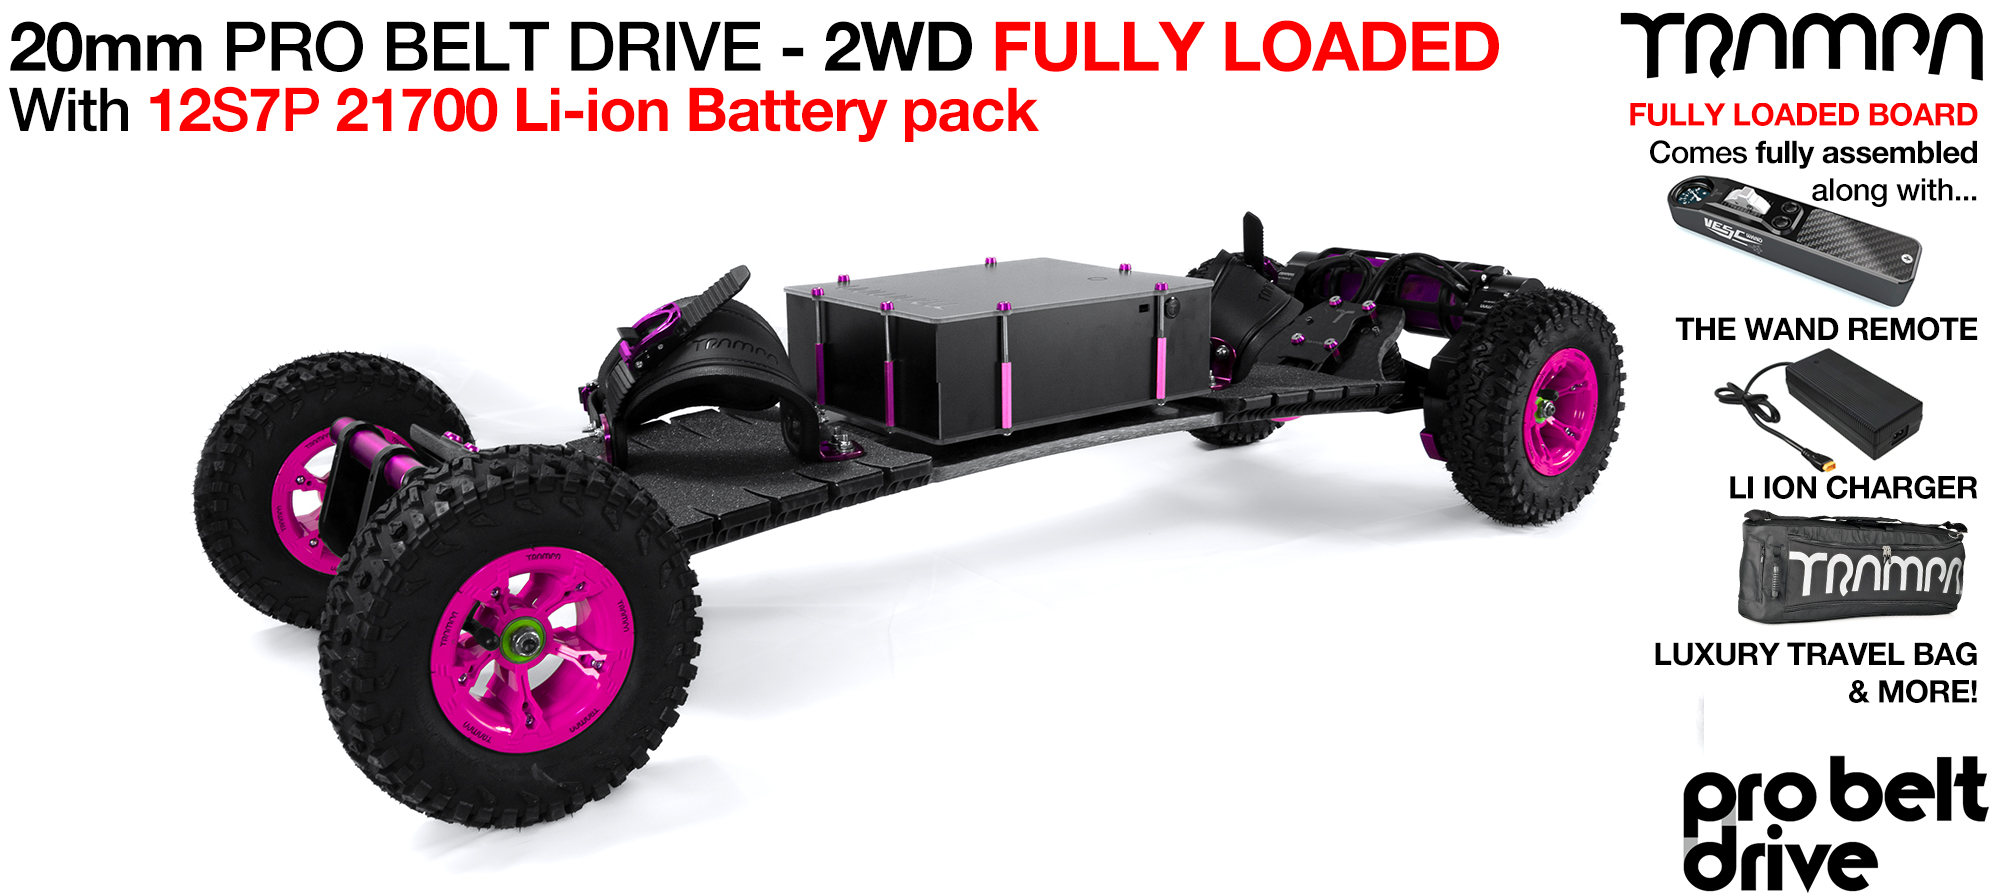 2WD 20mm PRO BELT DRIVE E-MTB - LOADED with 21700 Cell Pack (£2,150) (out of stock)